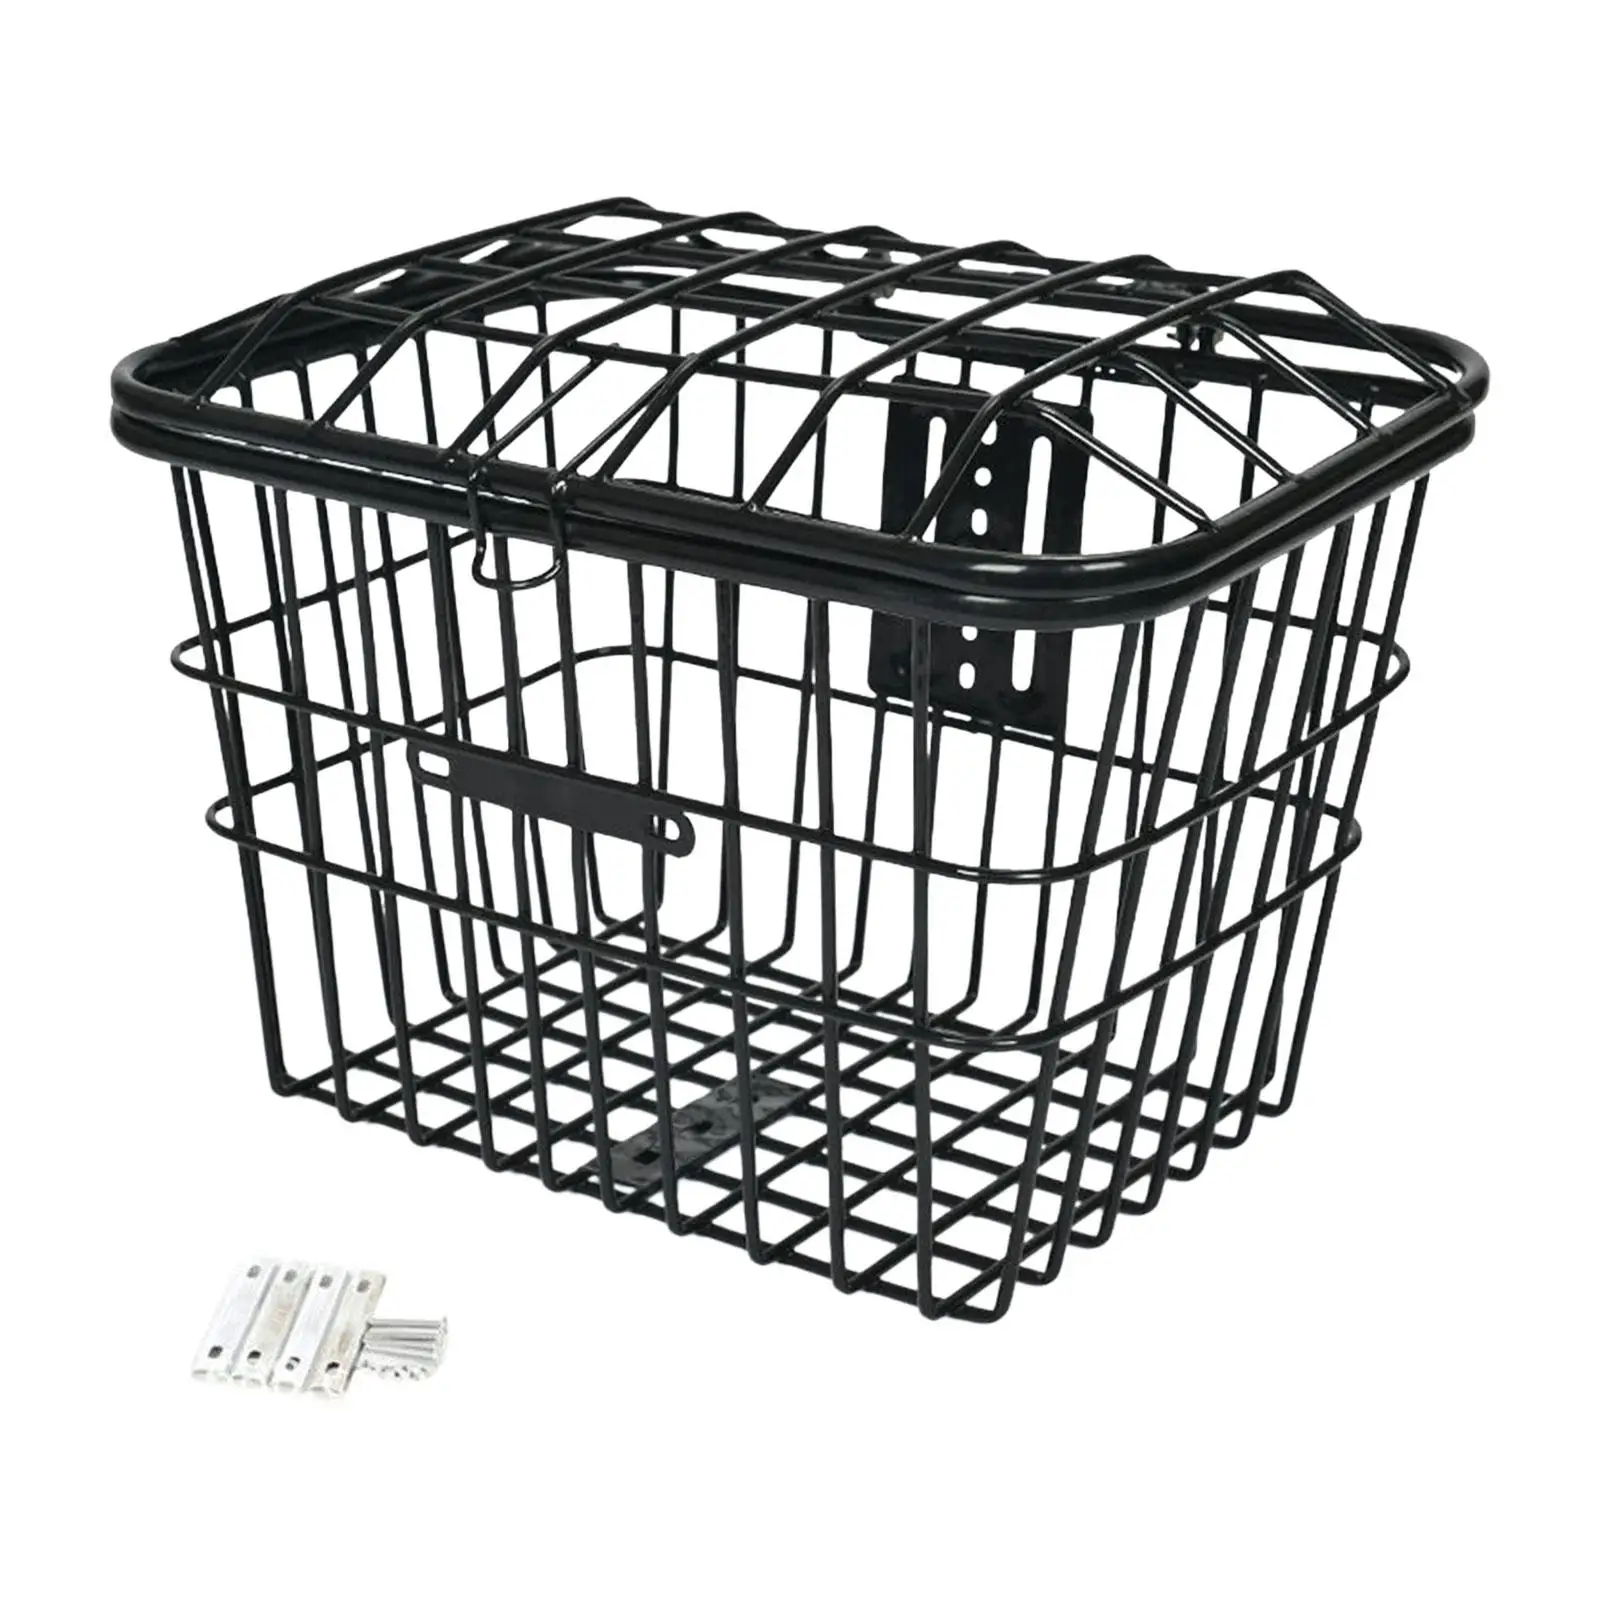 Bike Metal Mesh Front or Rear Basket with Lid for Riding Luggage Outdoor